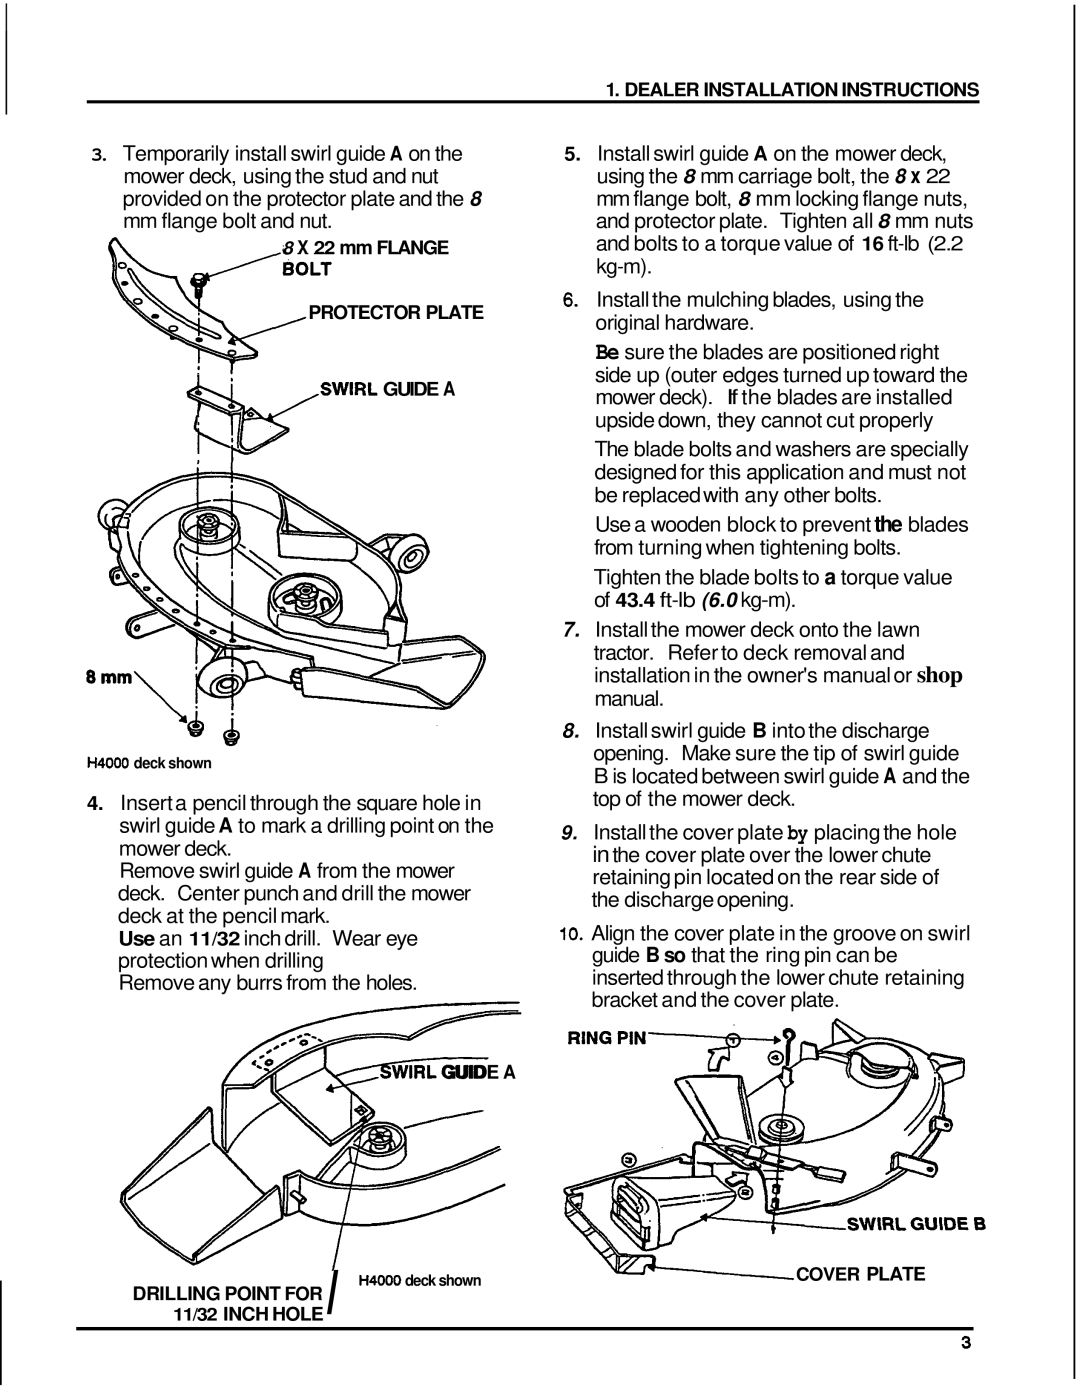 Honda Power Equipment H2000 manual Dealer Installation Instructions, 8 X 22 mm FLANGE, Guide A, T,WlRL GUIDE A, Cover Plate 